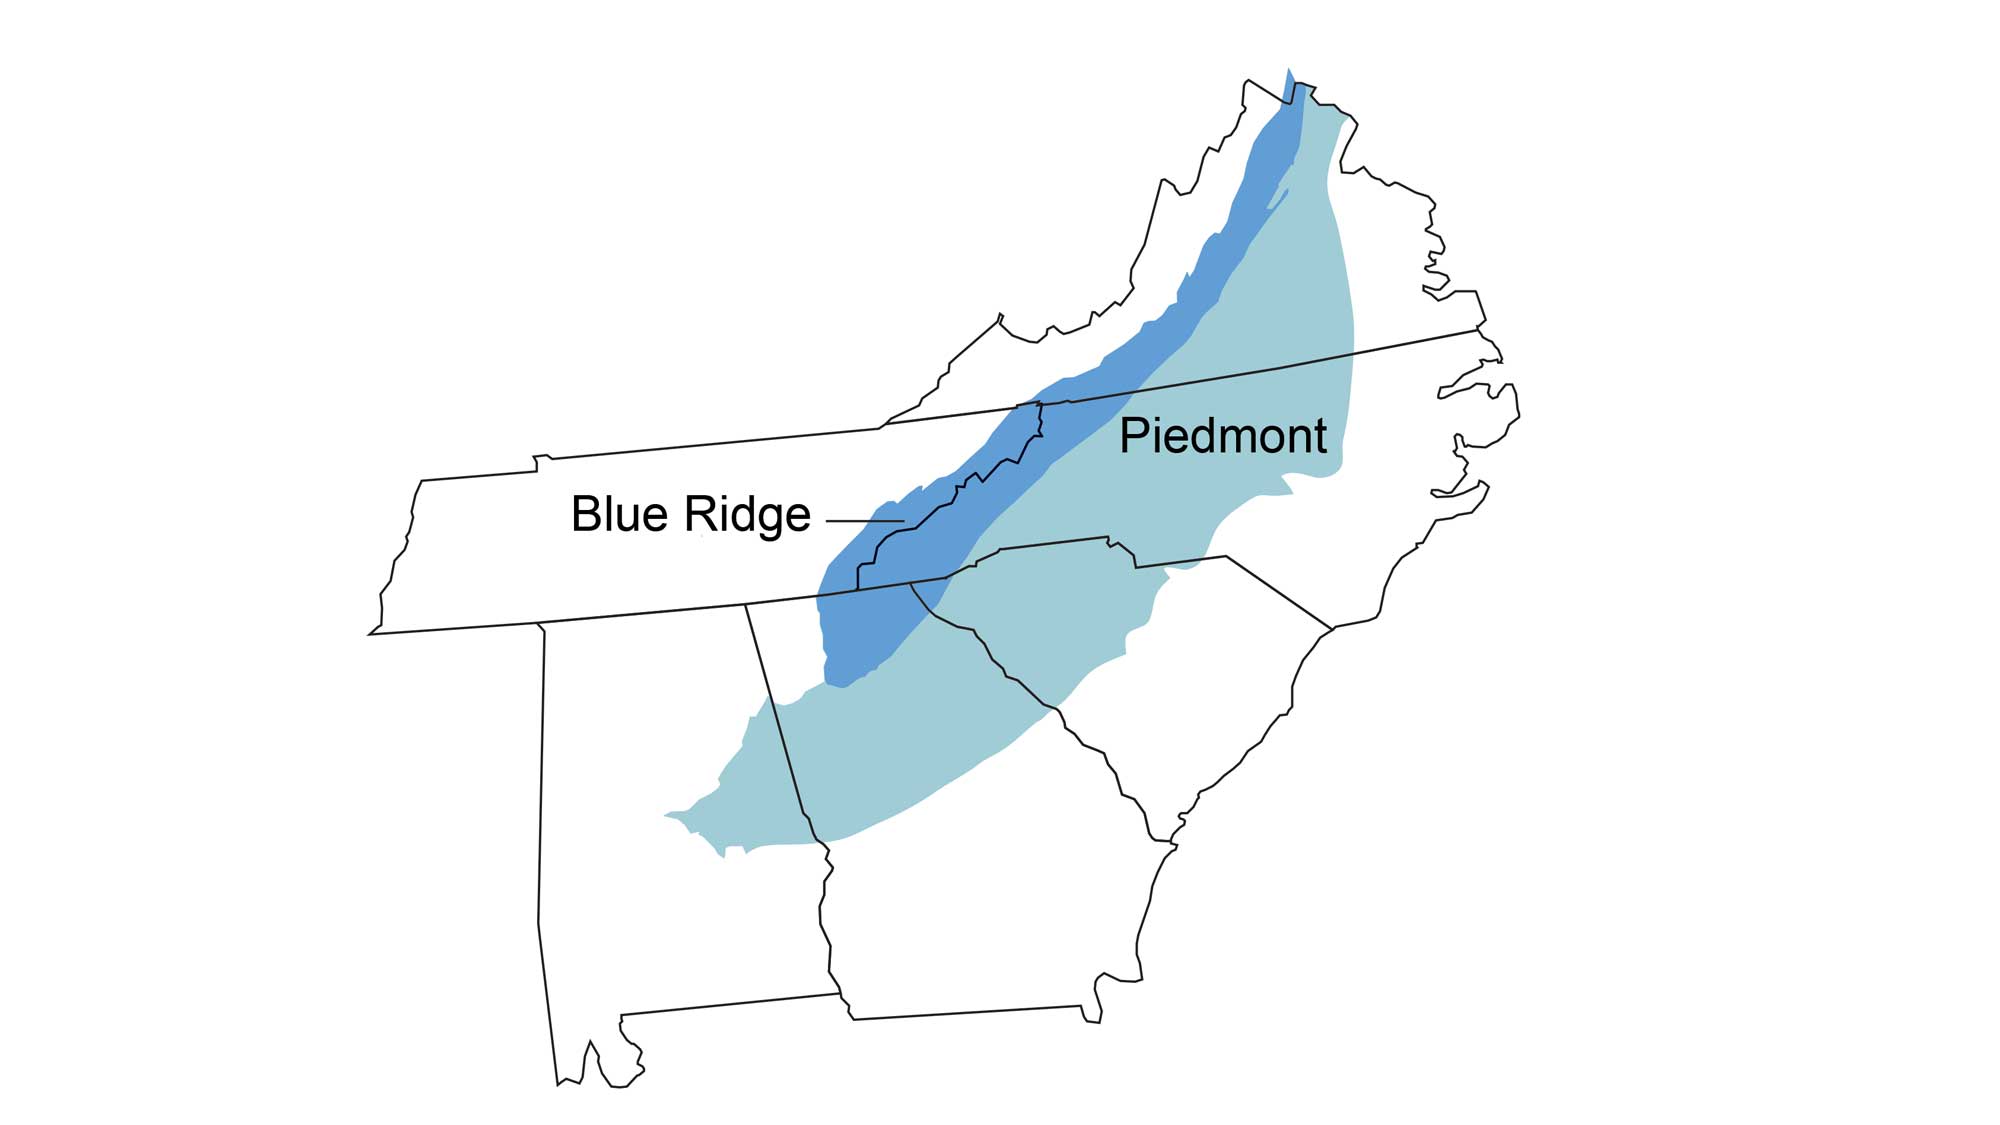 Map showing the boundaries of the Blue Ridge and Piedmont regions.